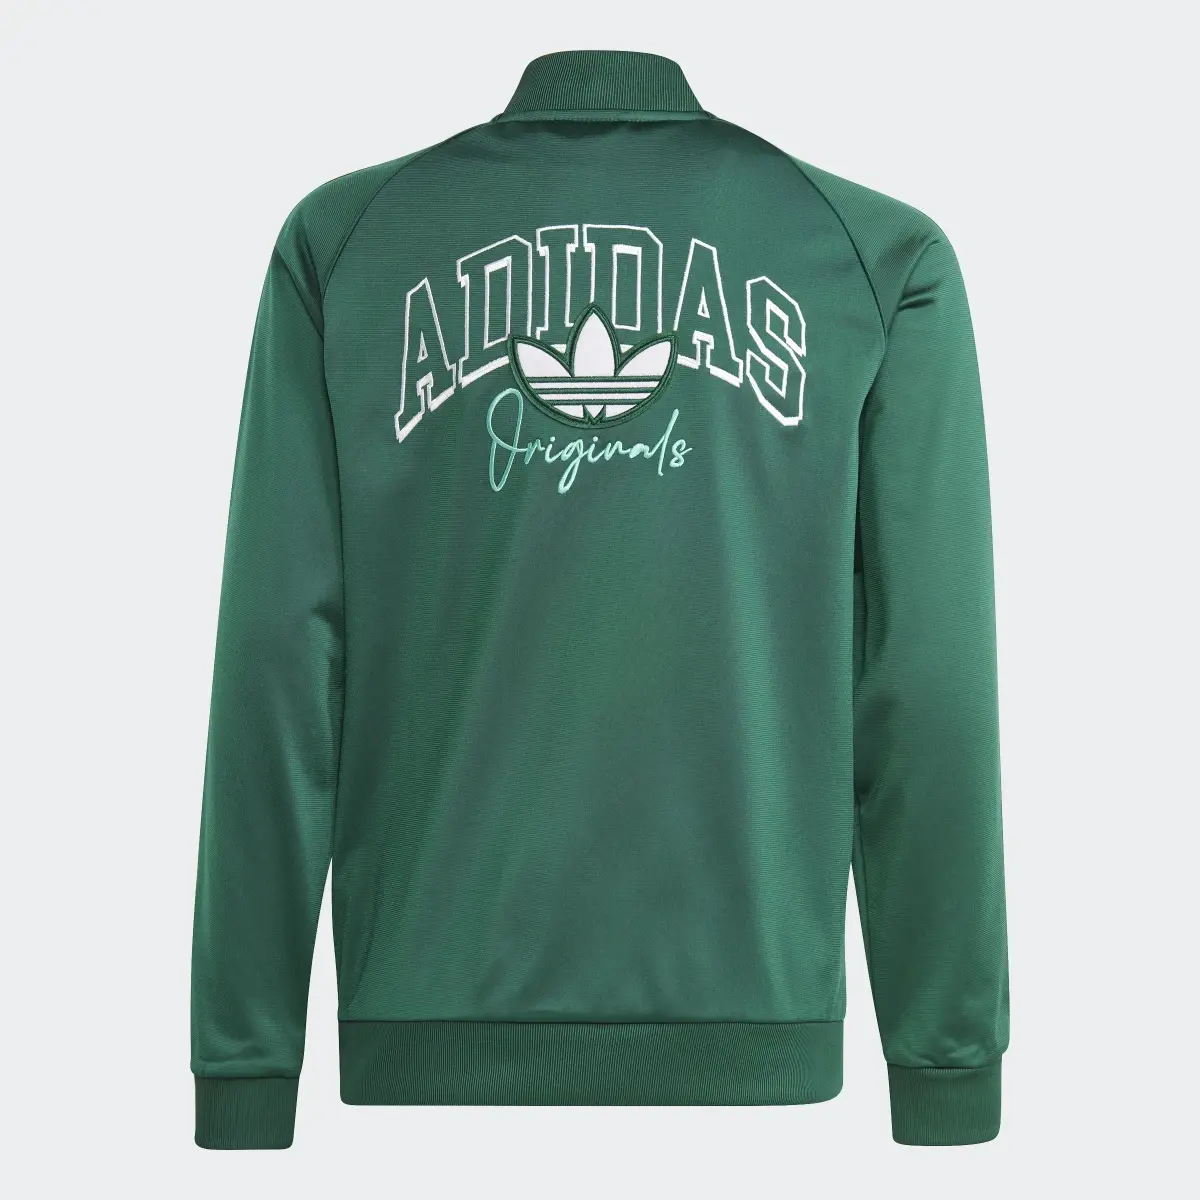 Adidas Collegiate Graphic Pack SST Track Jacket. 2